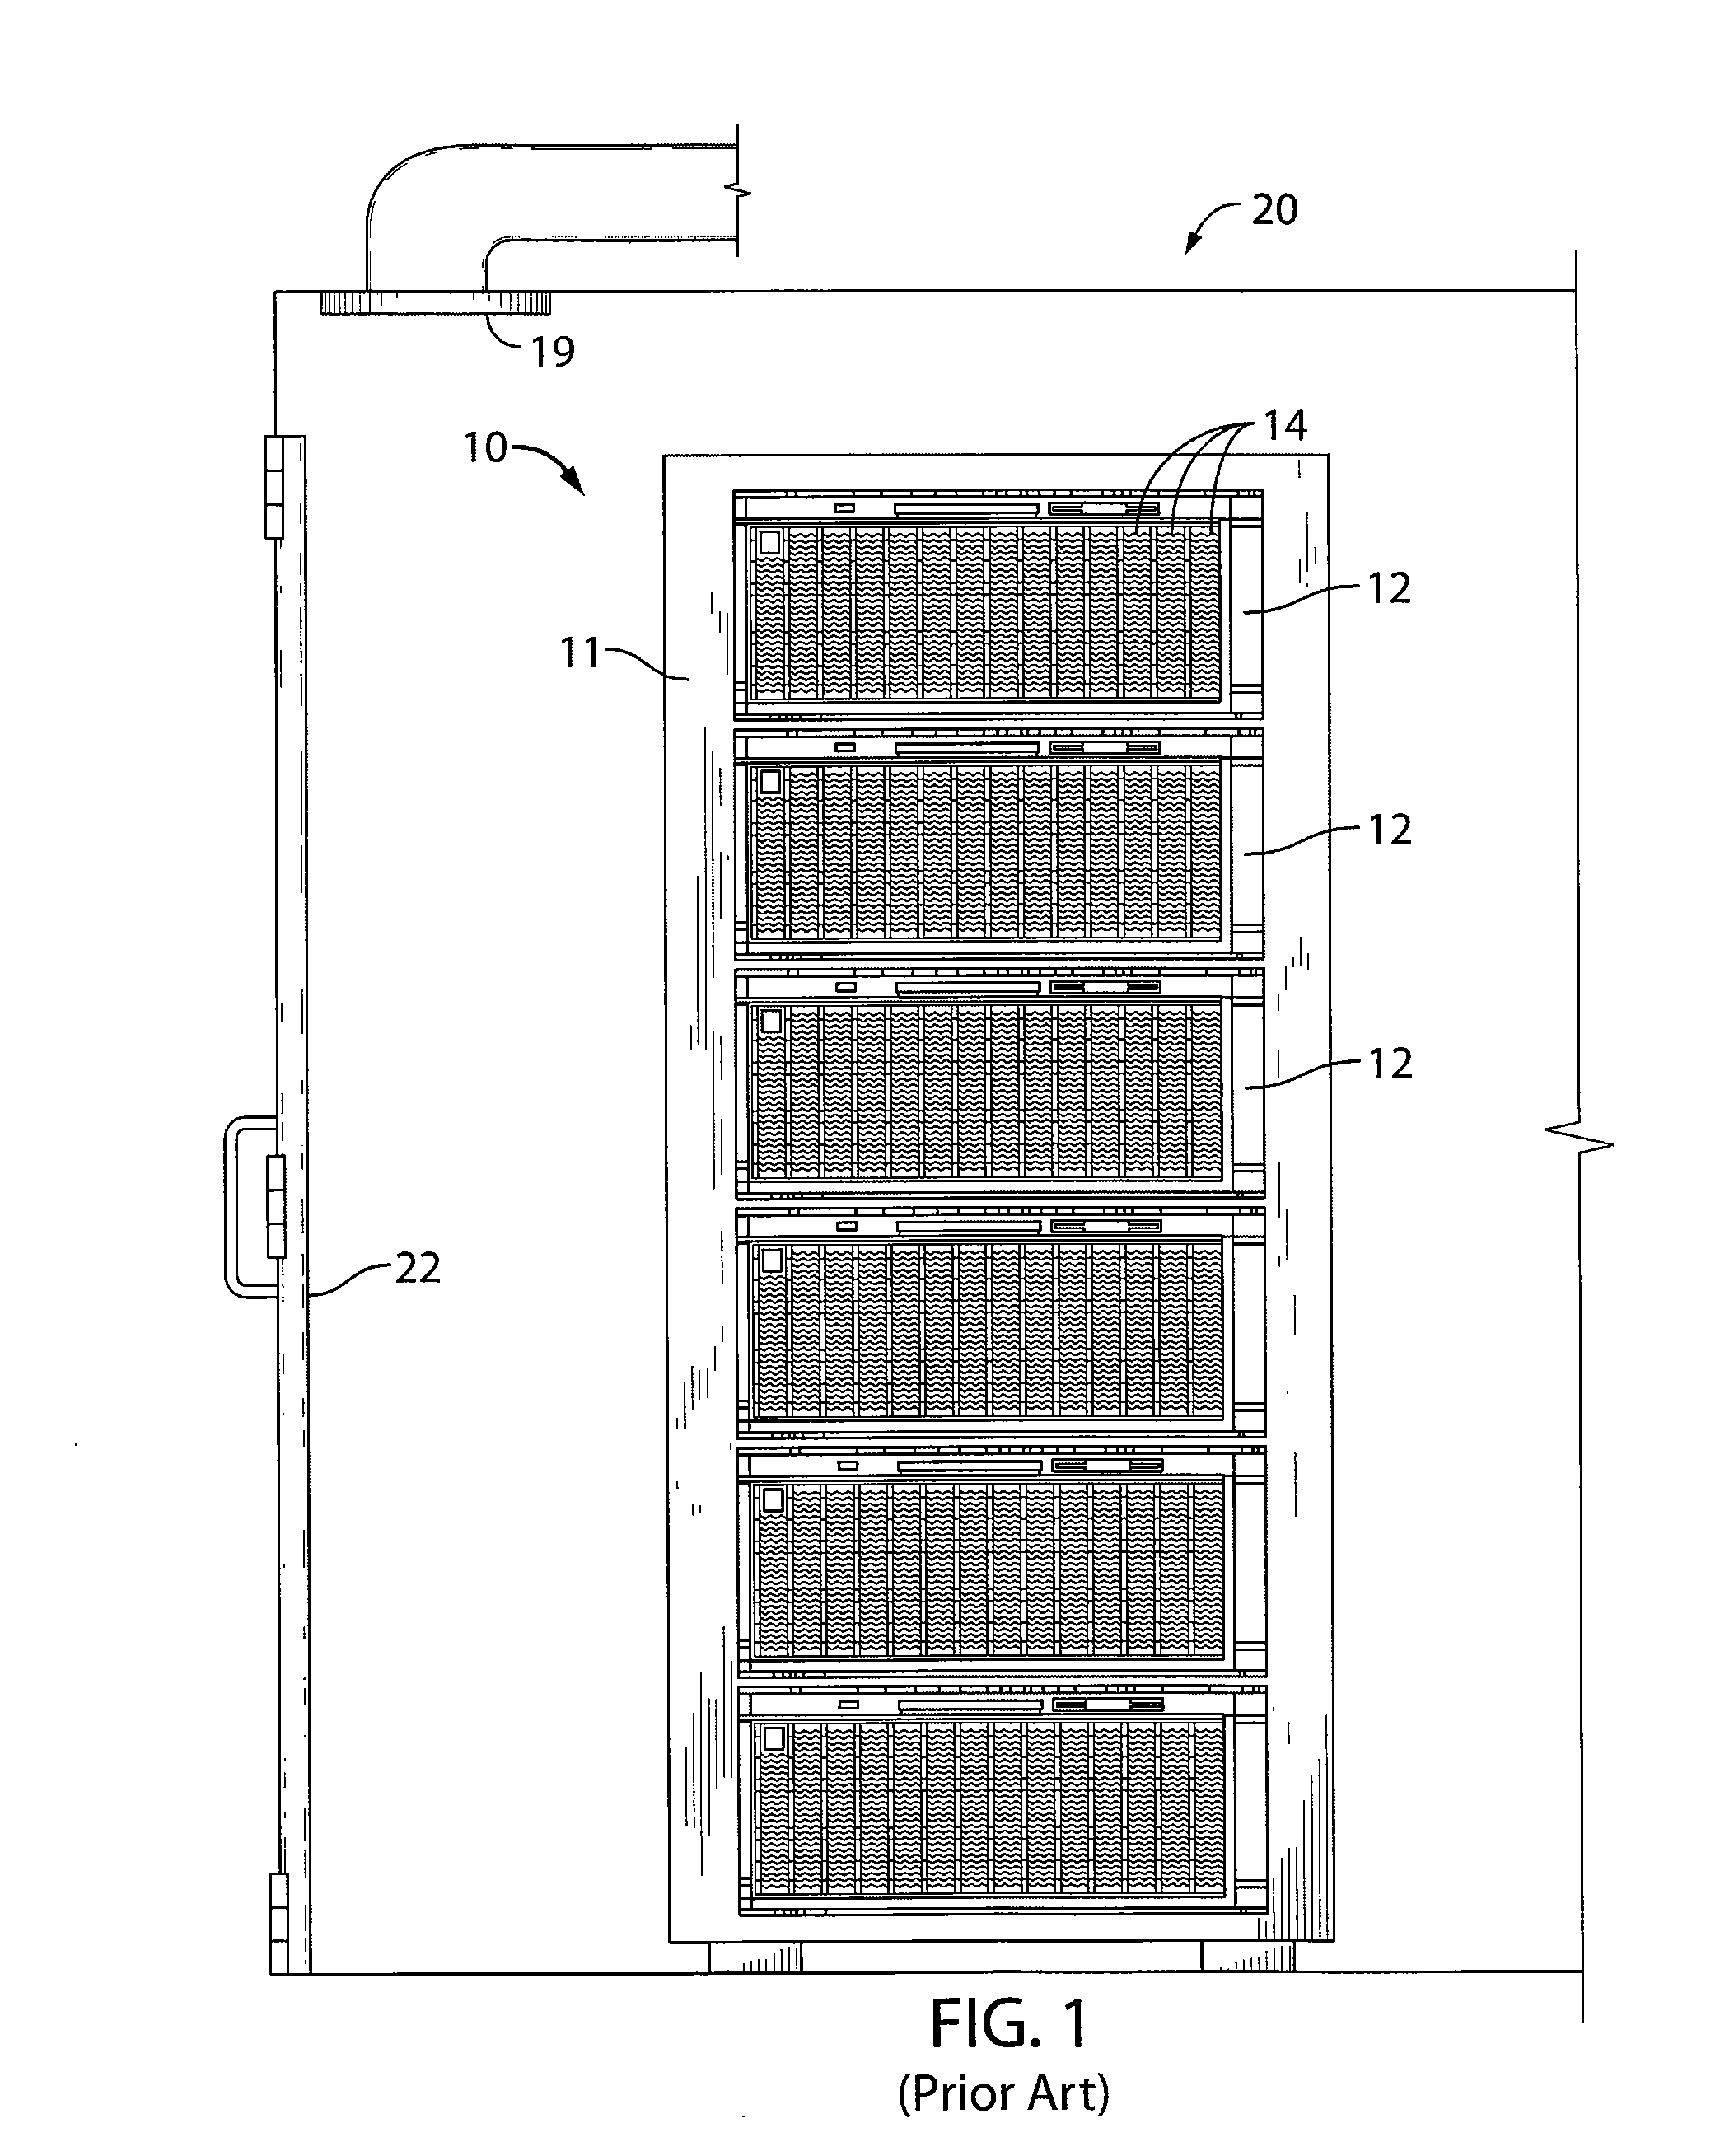 Design structure for an interposer for expanded capability of a blade server chassis system